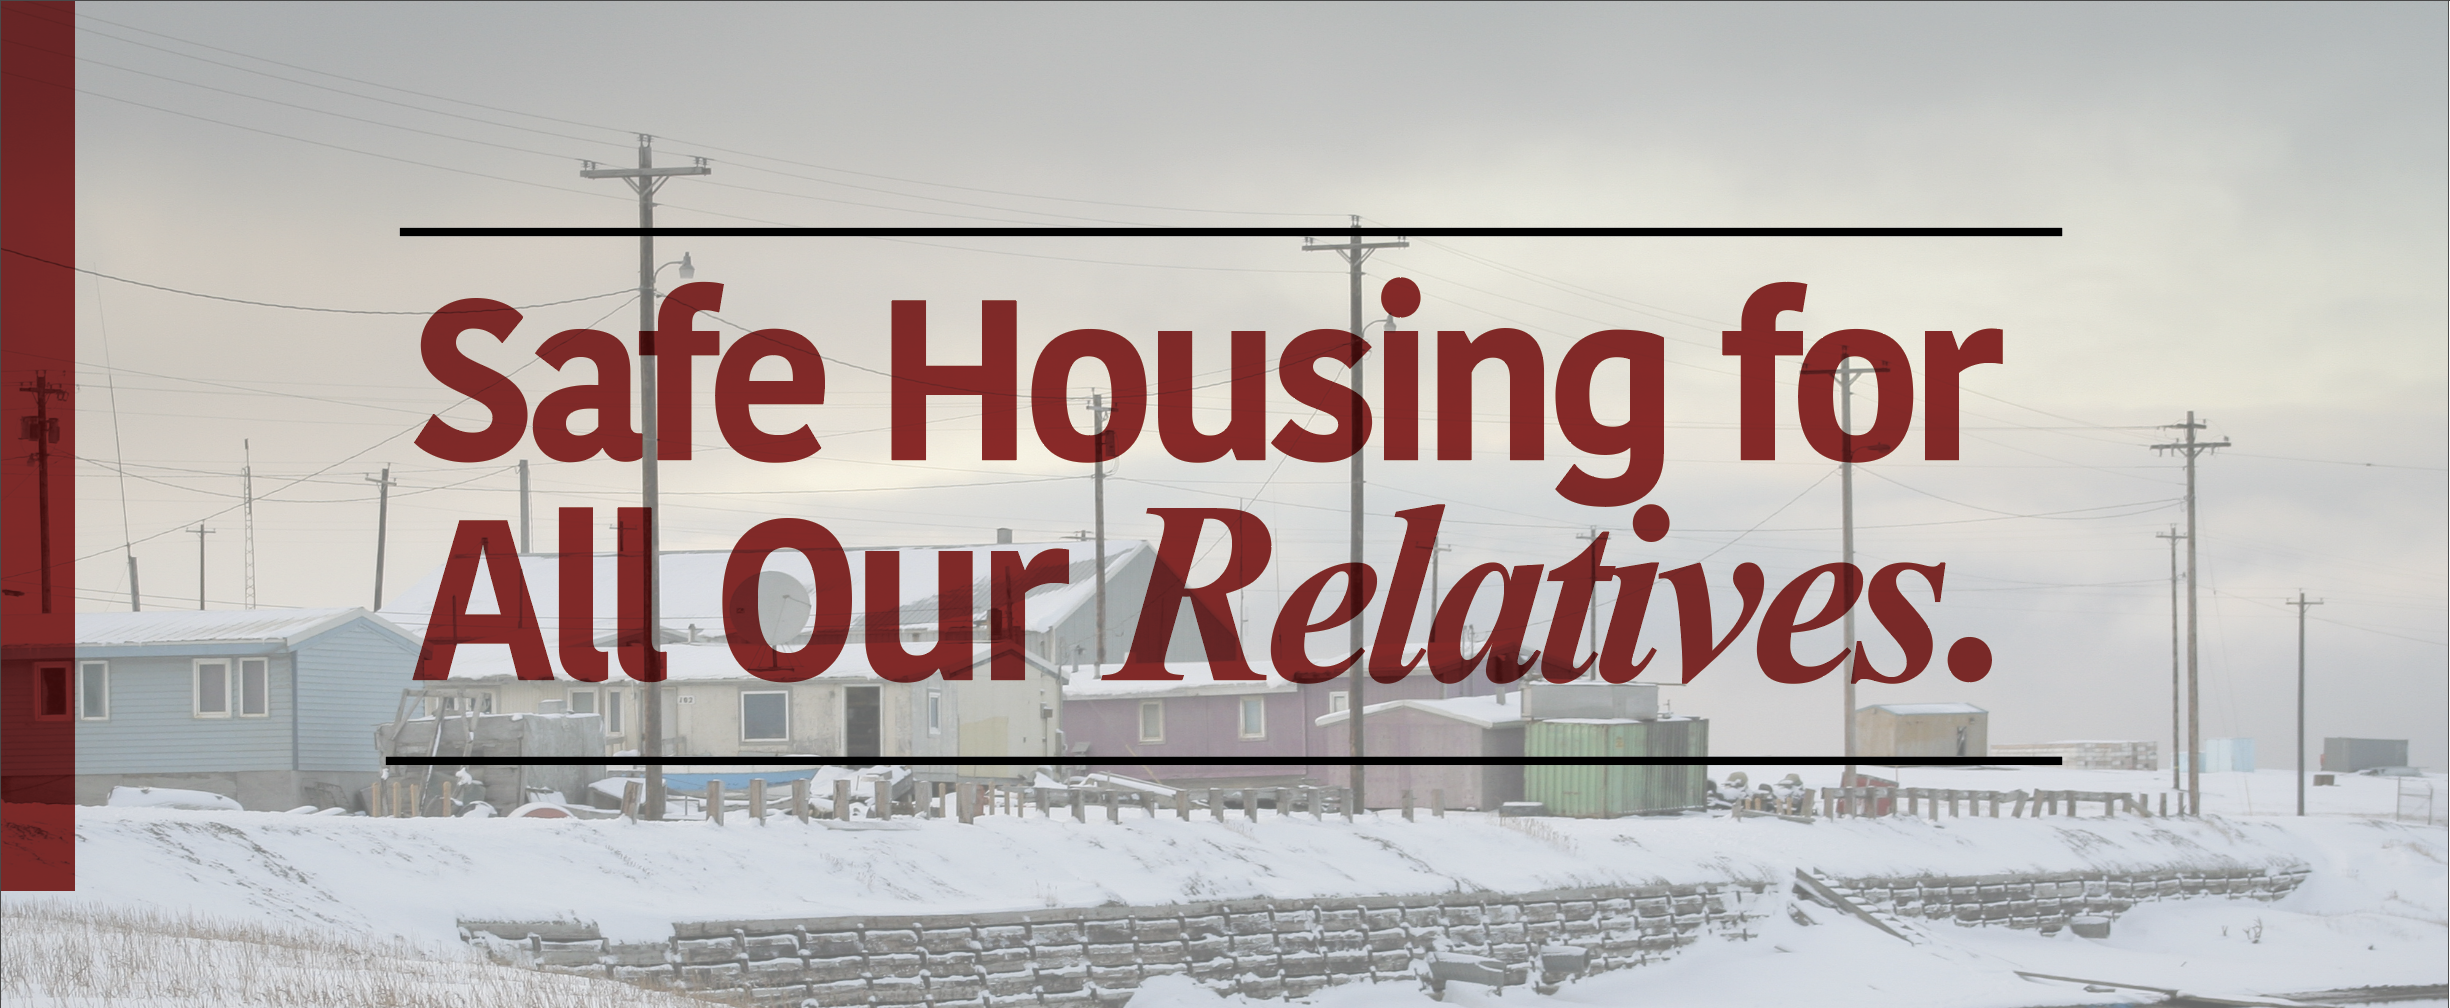 "Safe Housing for All Our Relatives" text in front of houses with snow-covered roofs.